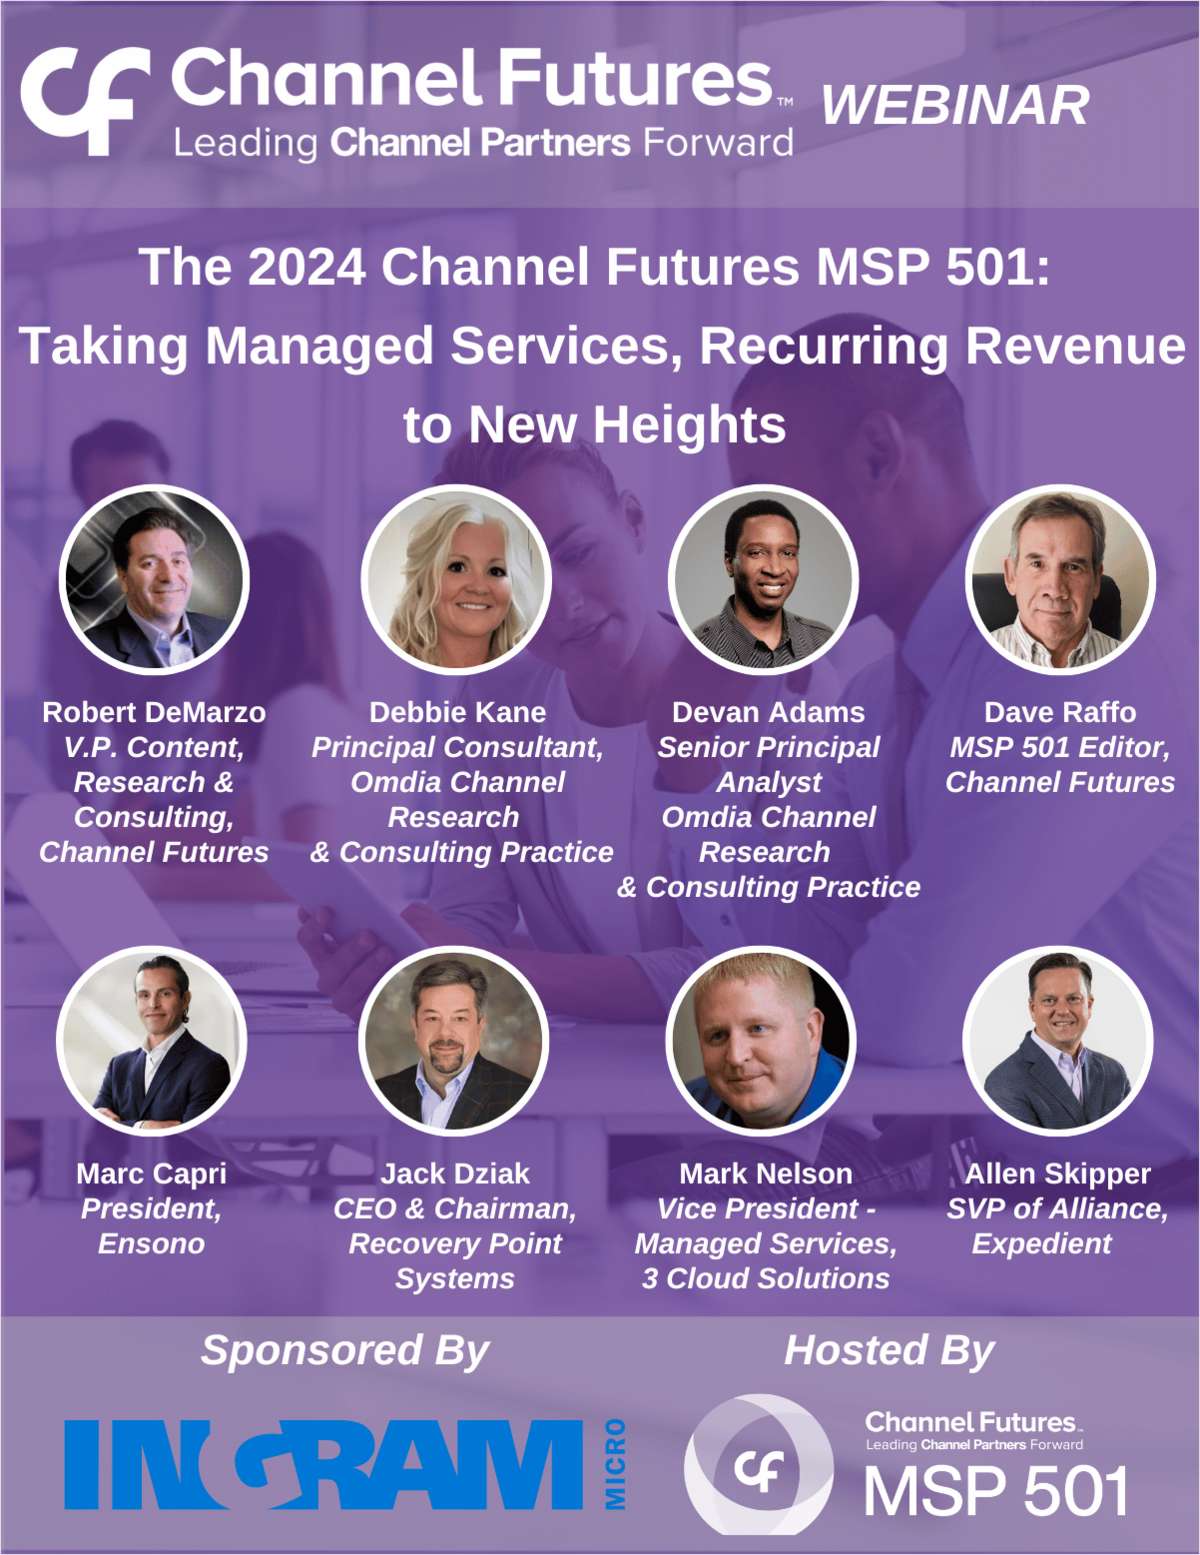 The 2024 Channel Futures MSP 501: Taking Managed Services, Recurring Revenue to New Heights